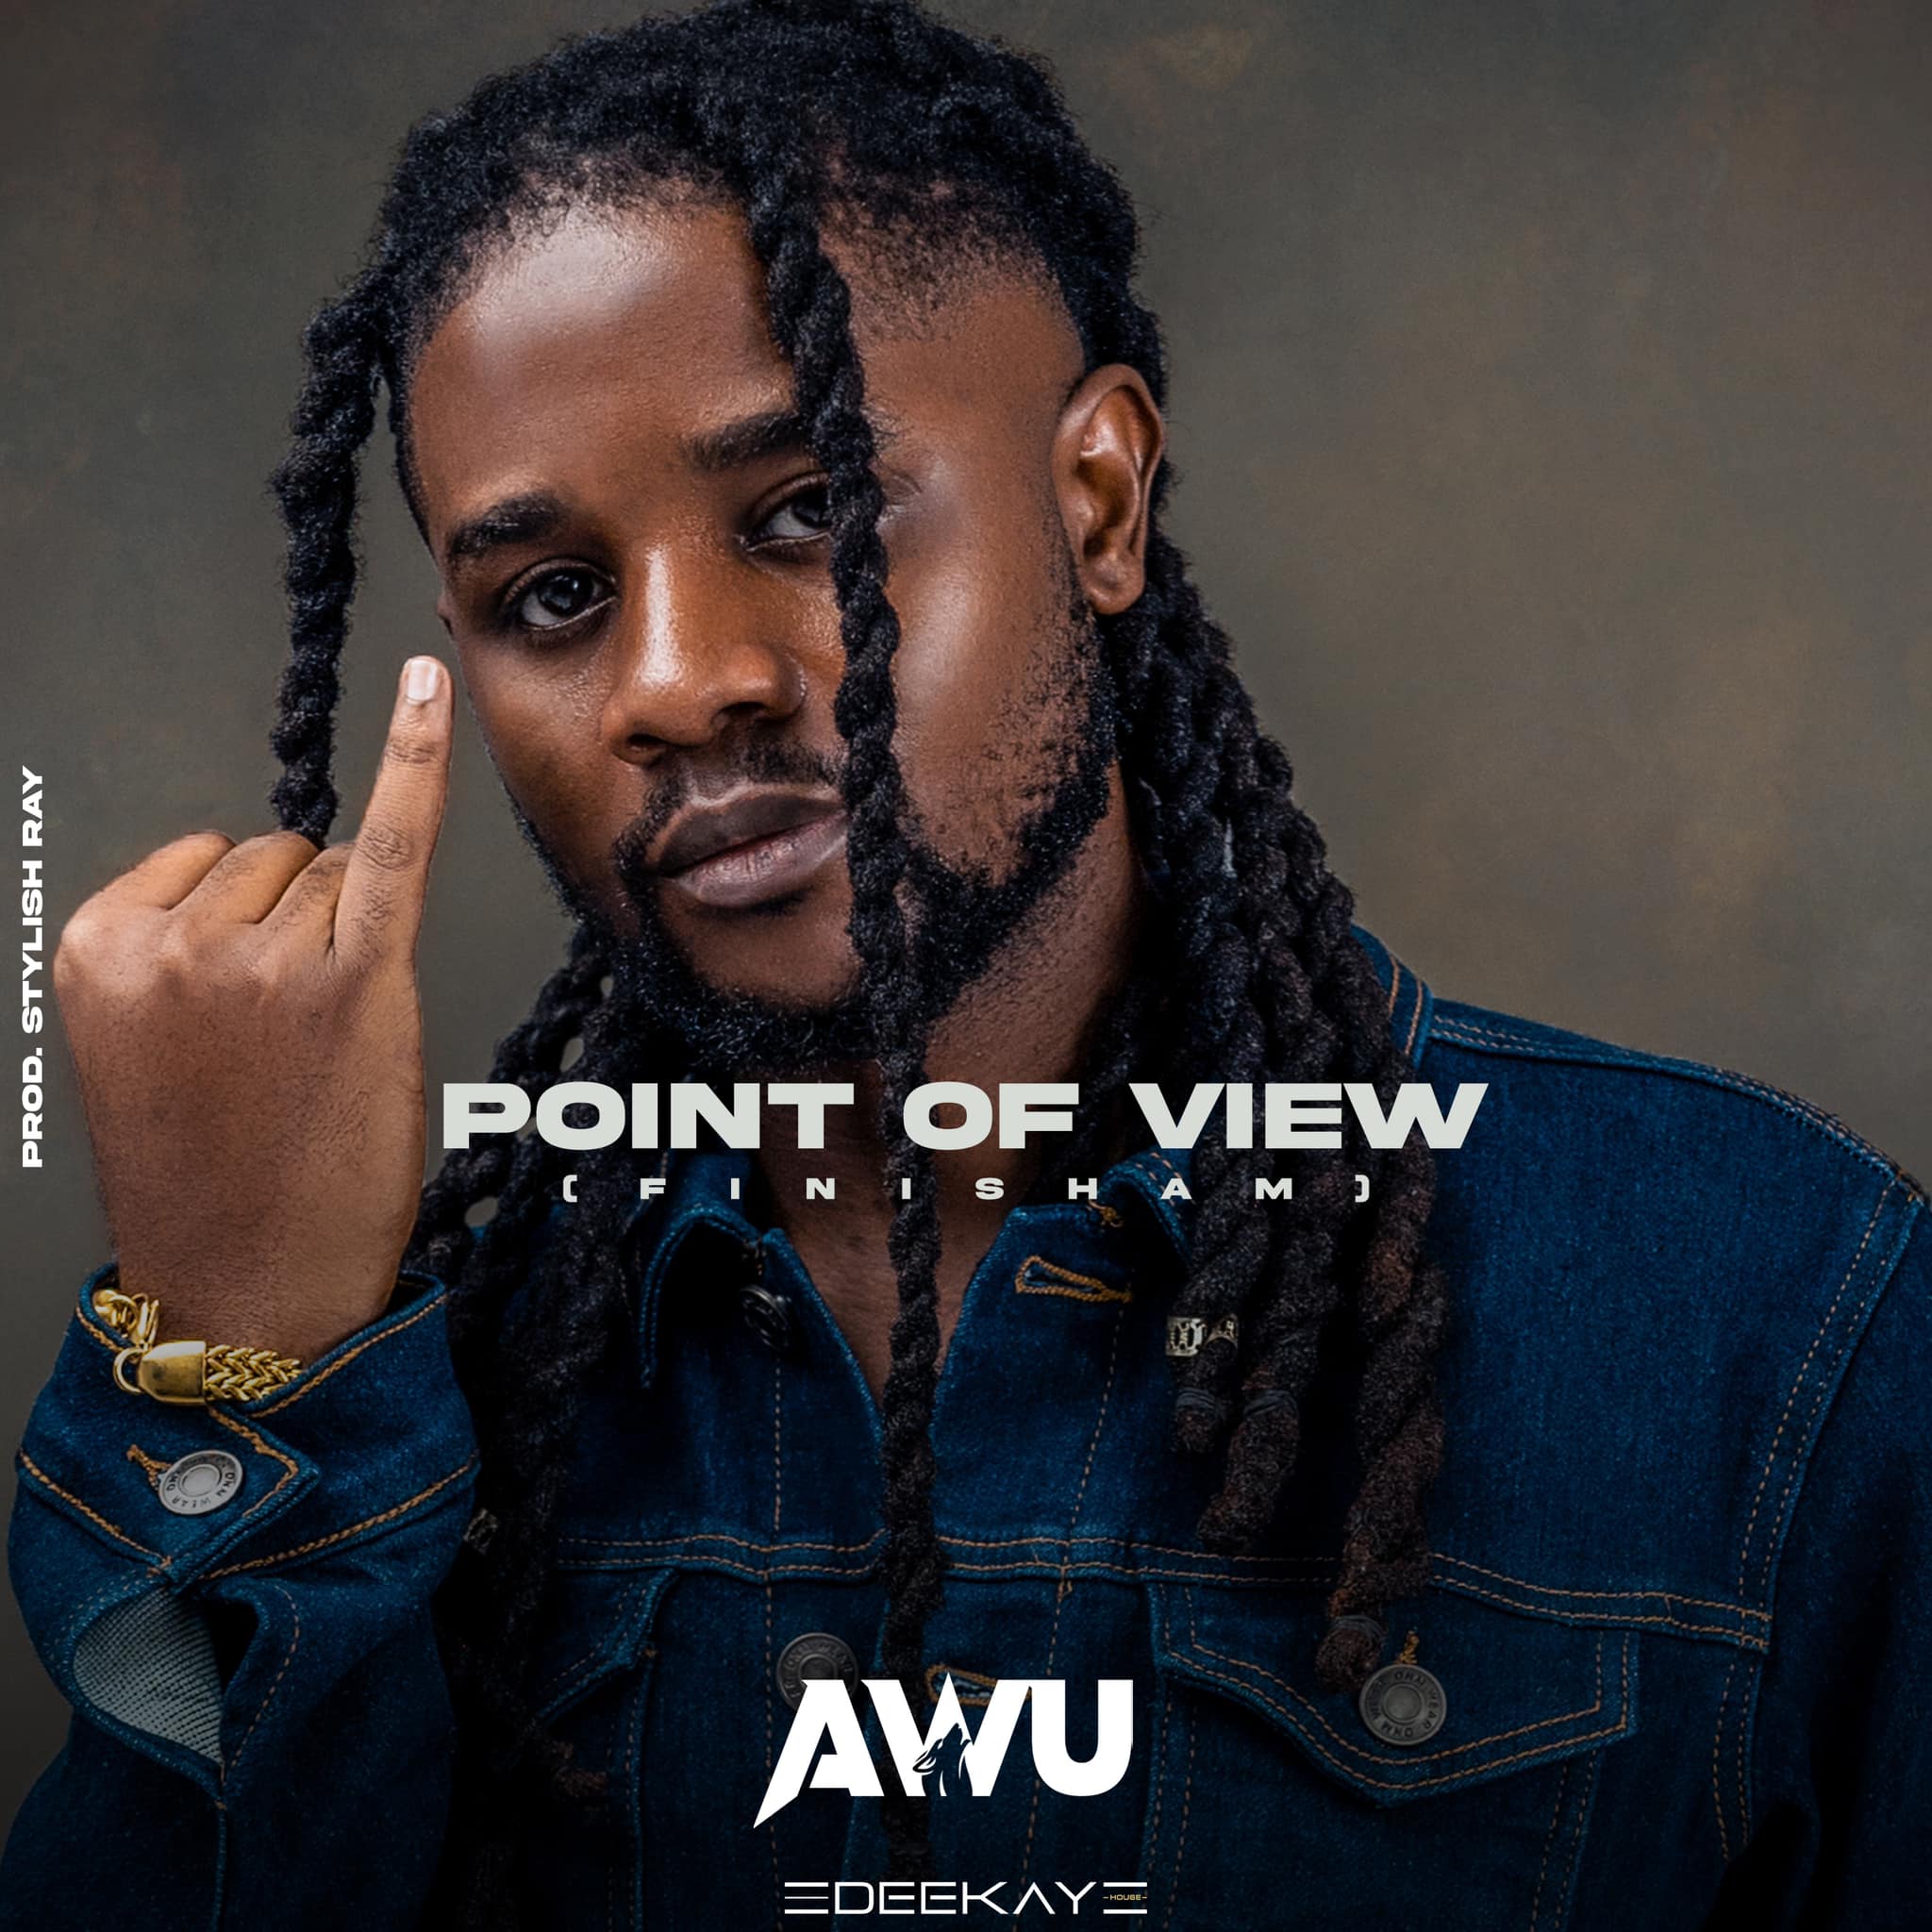 [Video]: Awu – Point of View (Finisham)